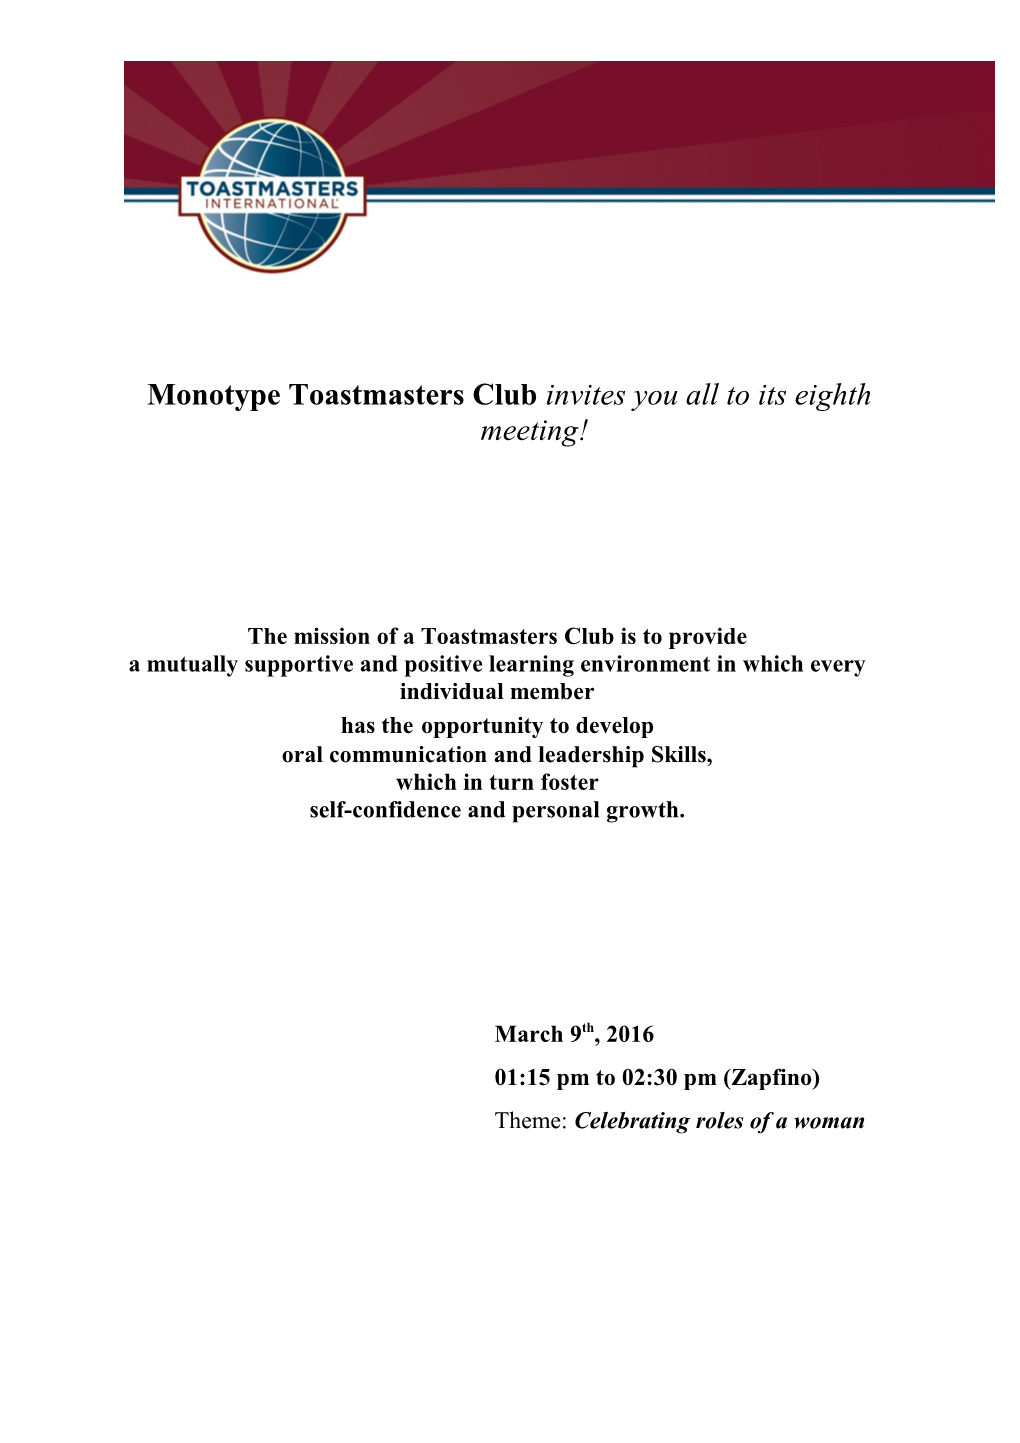 Monotype Toastmasters Club Invites You All to Its Eighthmeeting!